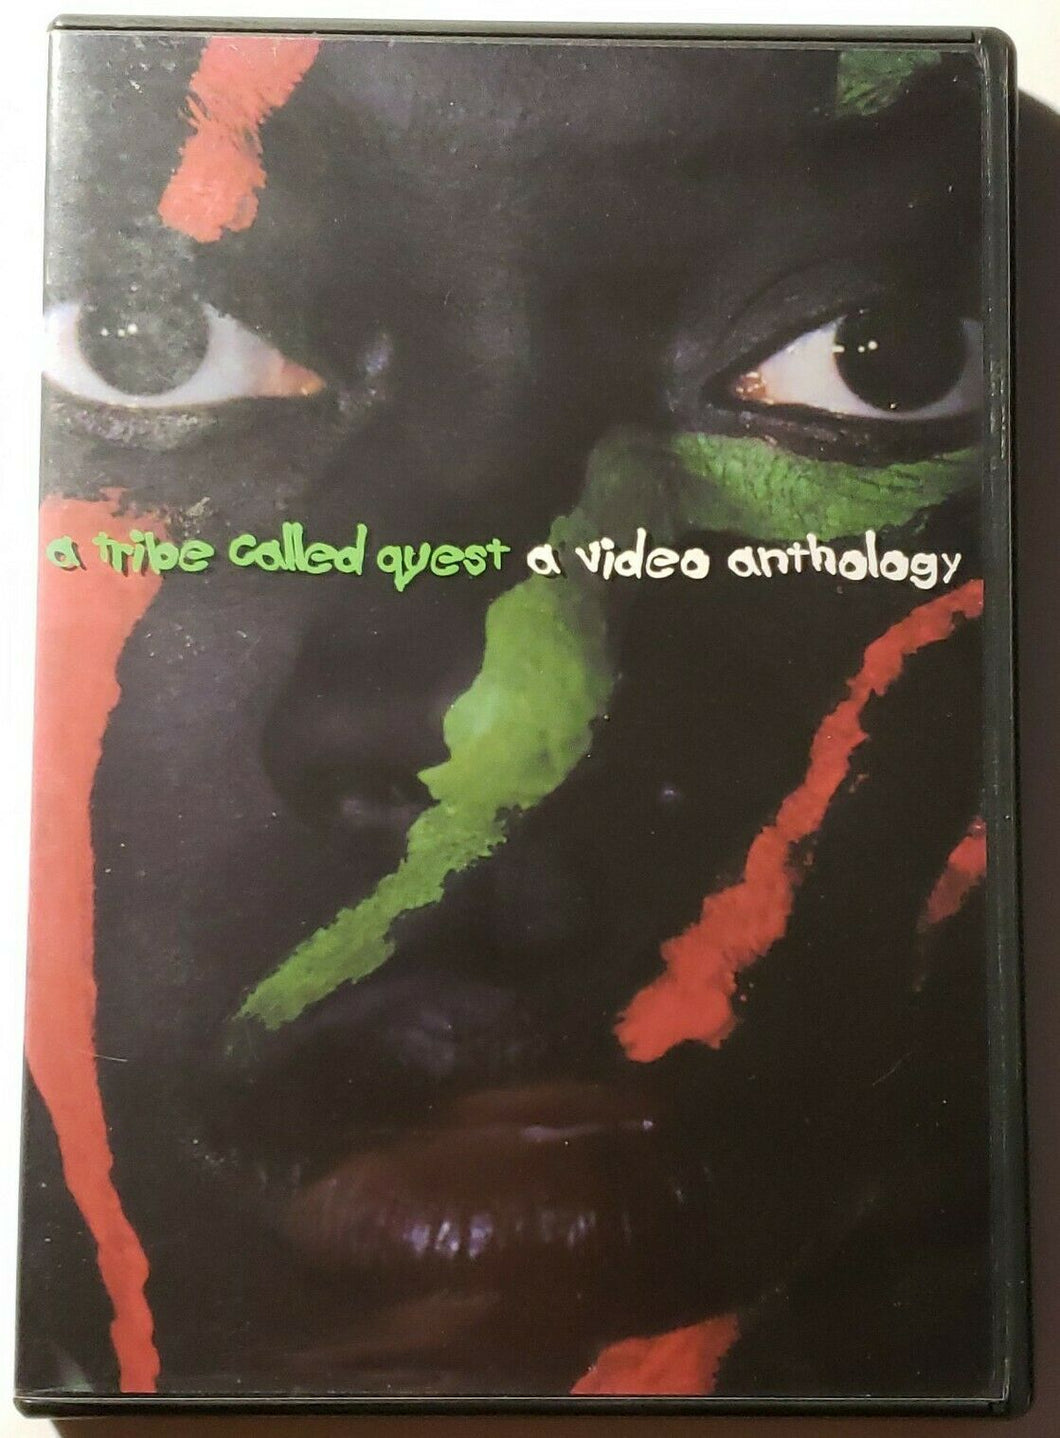 A TRIBE CALLED QUEST - A VIDEO ANTHOLOGY